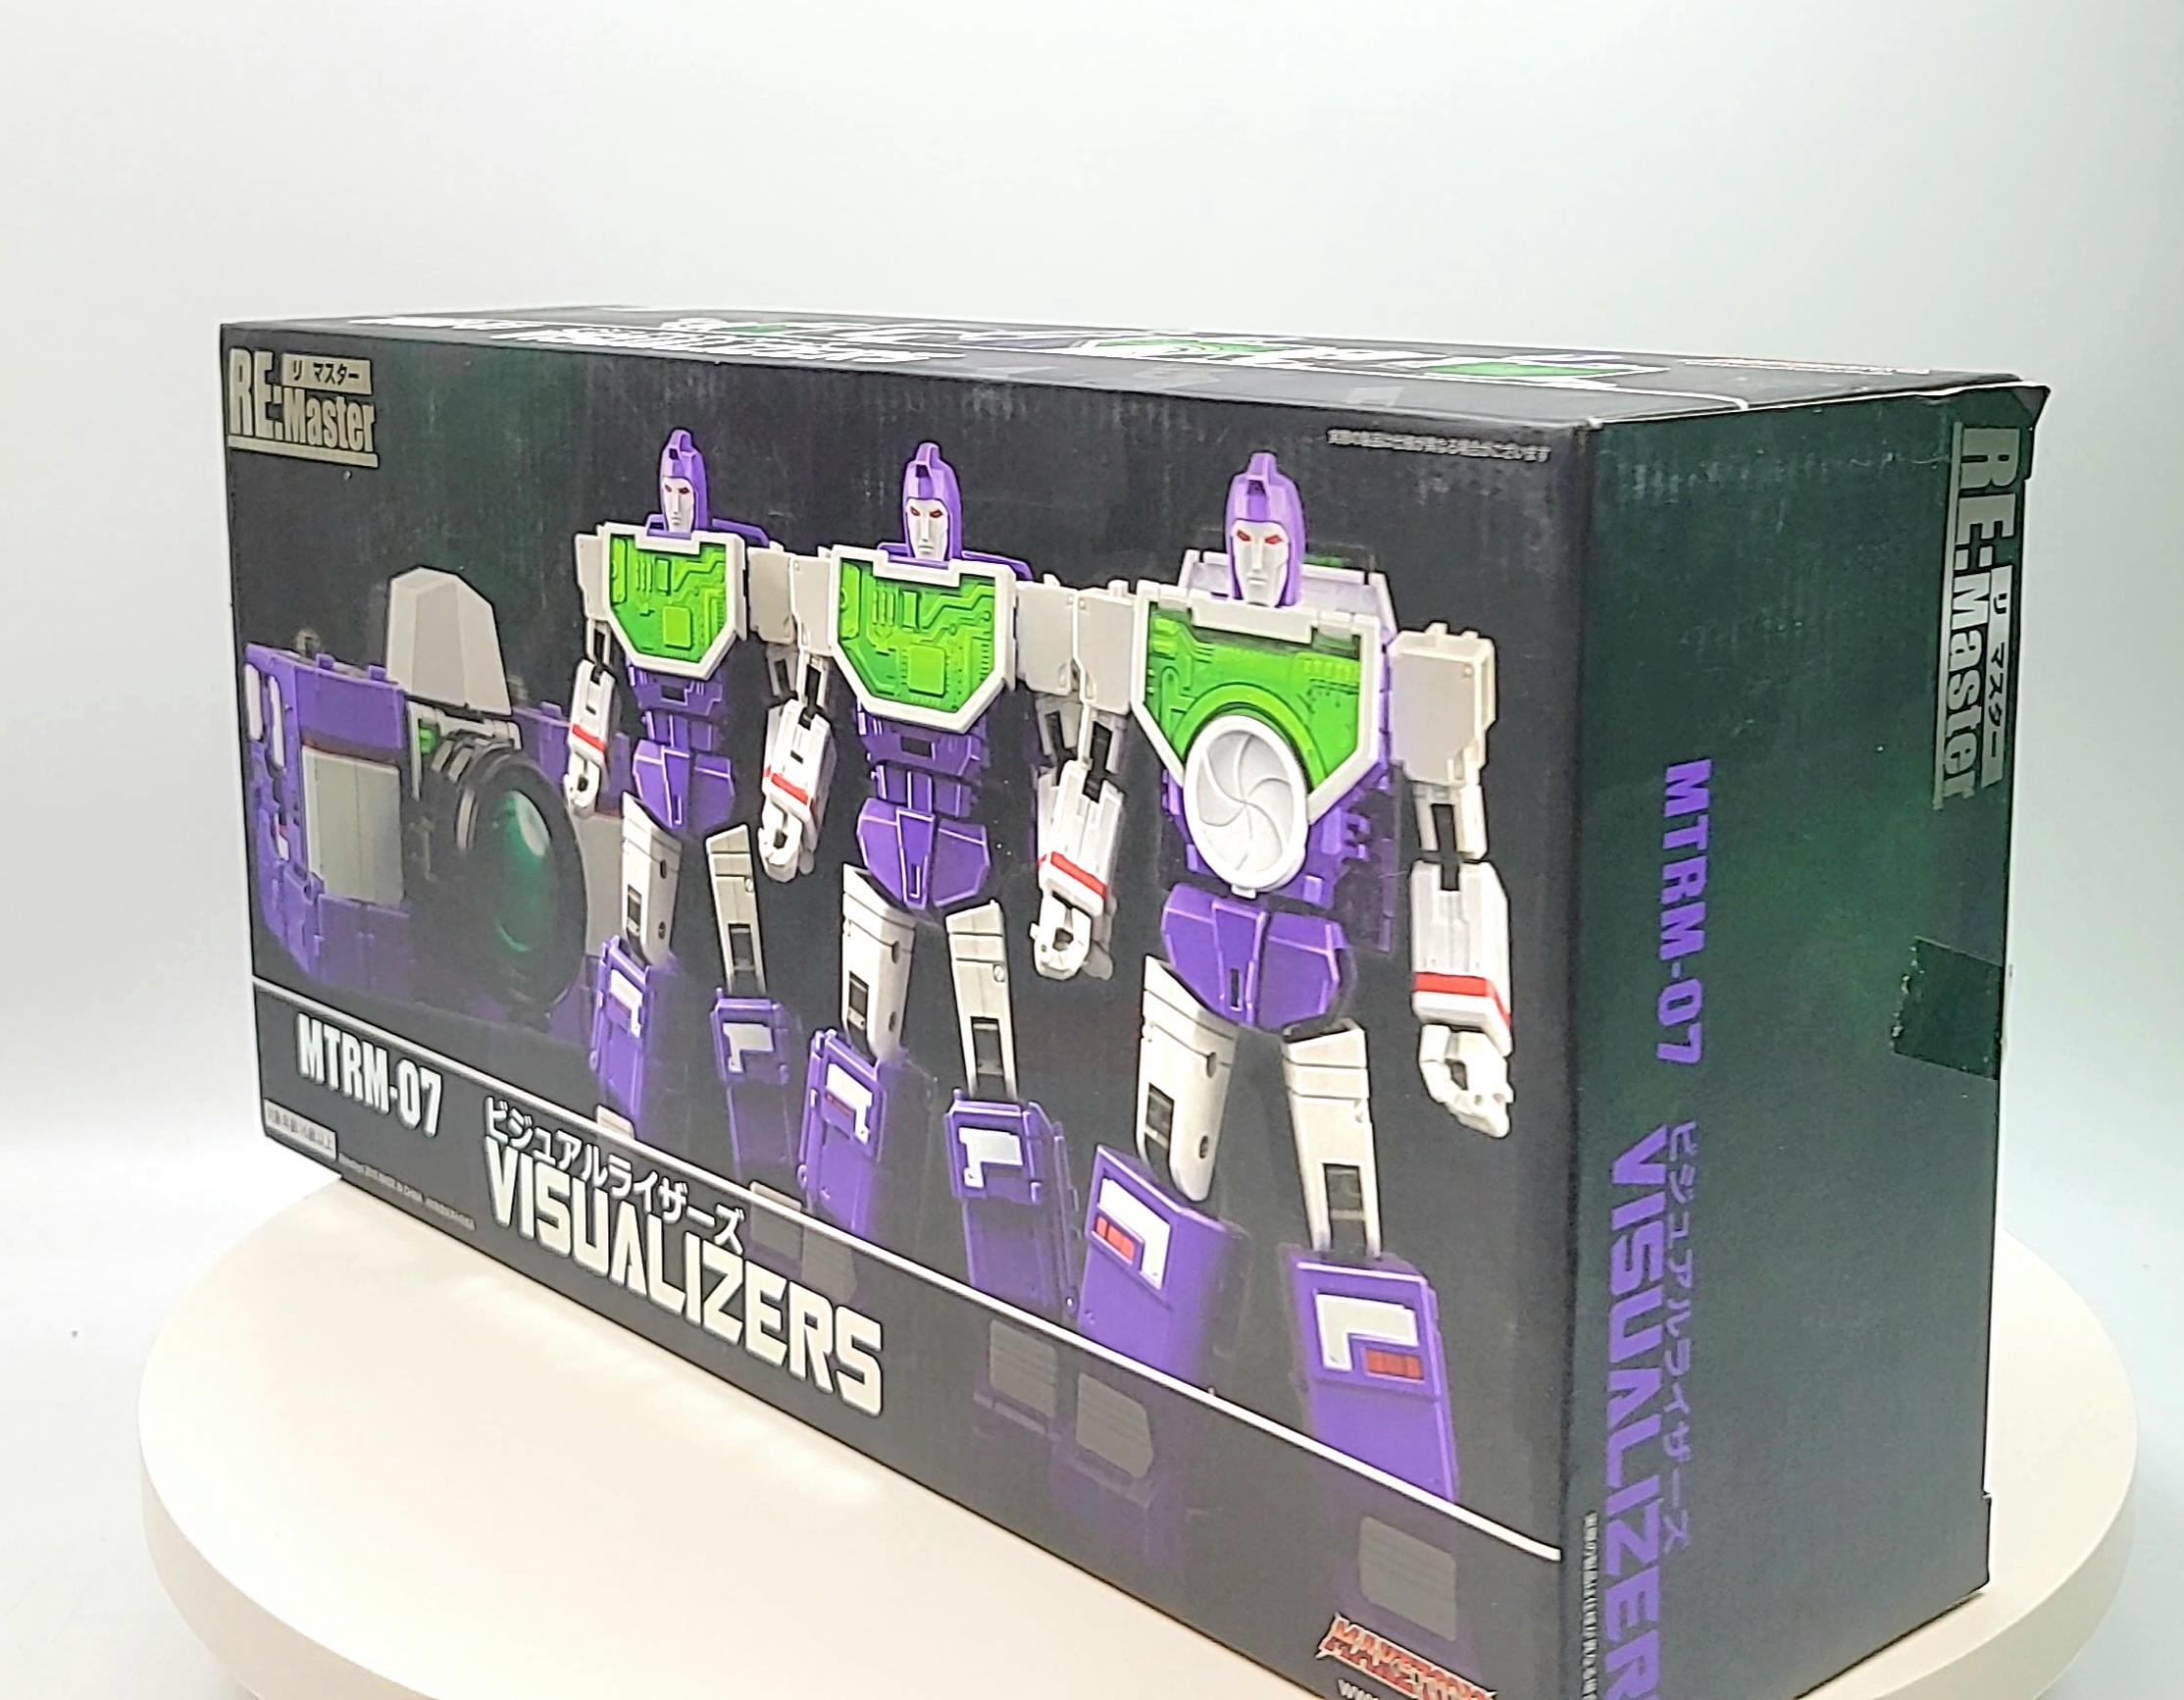 MakeToys MTRM 07 Visualizers Masterpiece Reflector BOX ONLY - NO FIGURE